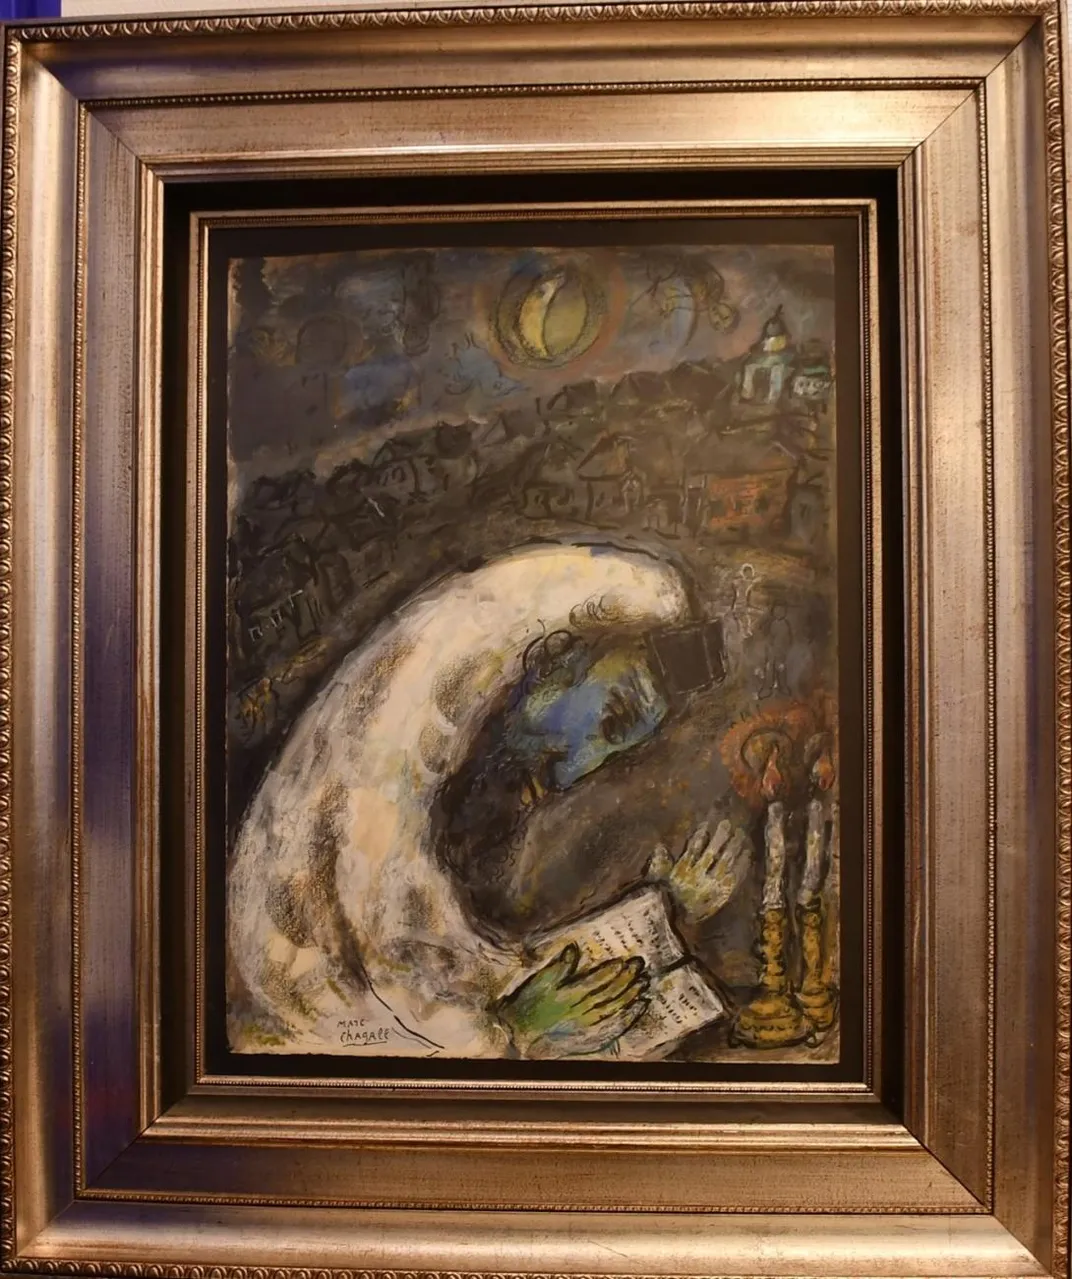 L'homme en priere by Marc Chagall